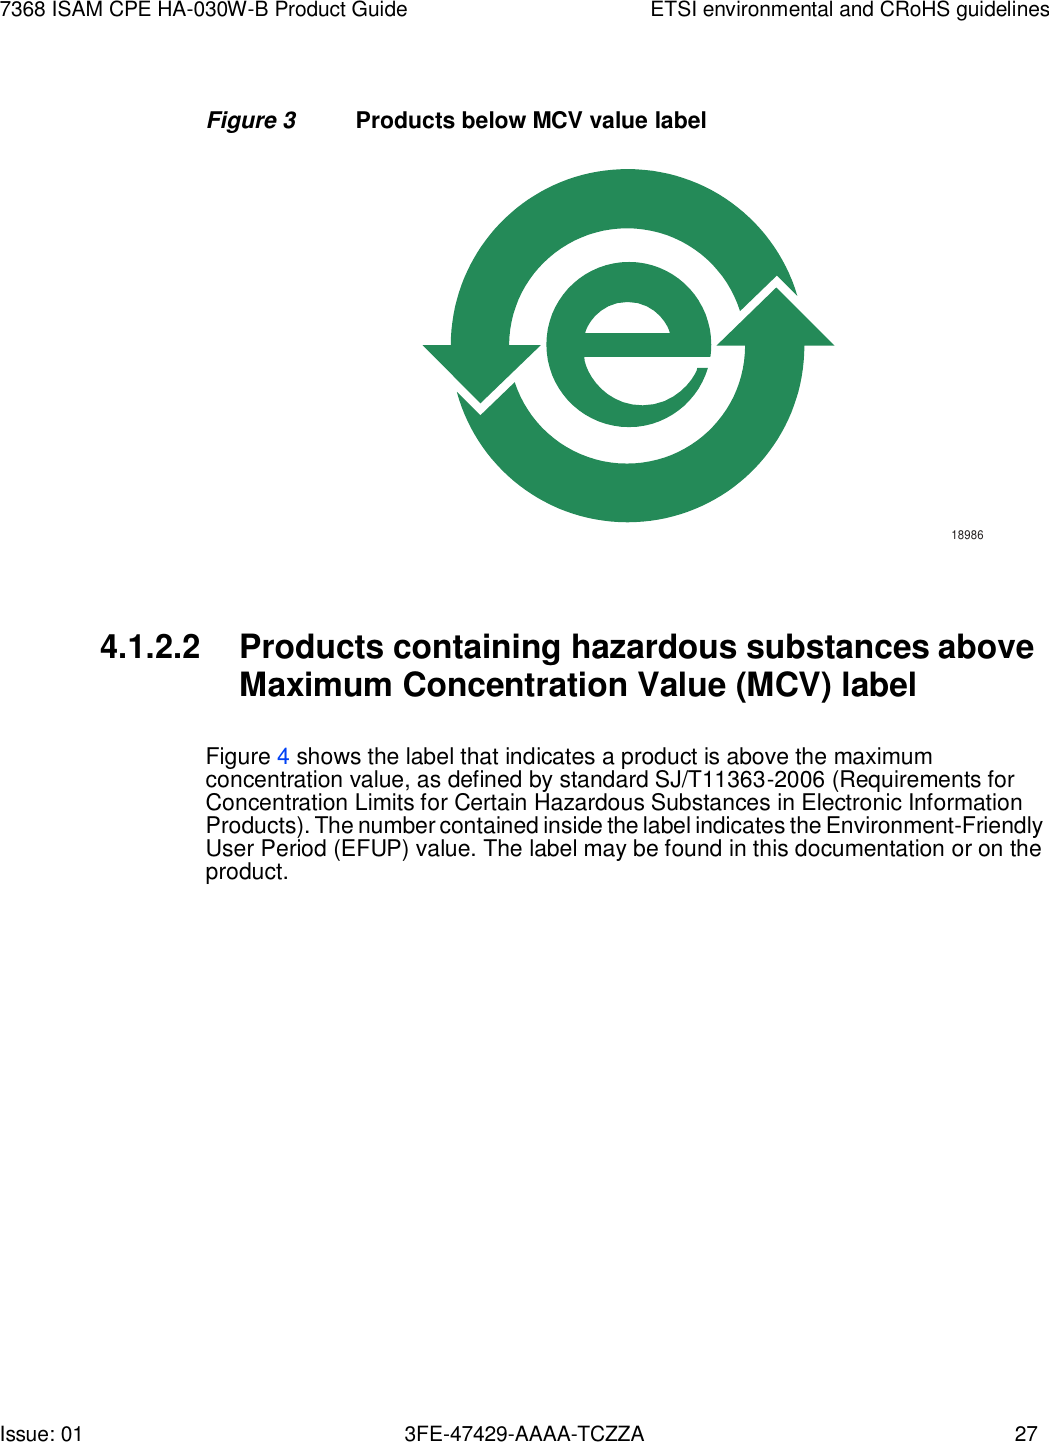 Issue: 01 3FE-47429-AAAA-TCZZA 27 7368 ISAM CPE HA-030W-B Product Guide ETSI environmental and CRoHS guidelines    Figure 3  Products below MCV value label  18986    4.1.2.2 Products containing hazardous substances above Maximum Concentration Value (MCV) label  Figure 4 shows the label that indicates a product is above the maximum concentration value, as defined by standard SJ/T11363-2006 (Requirements for Concentration Limits for Certain Hazardous Substances in Electronic Information Products). The number contained inside the label indicates the Environment-Friendly User Period (EFUP) value. The label may be found in this documentation or on the product. 